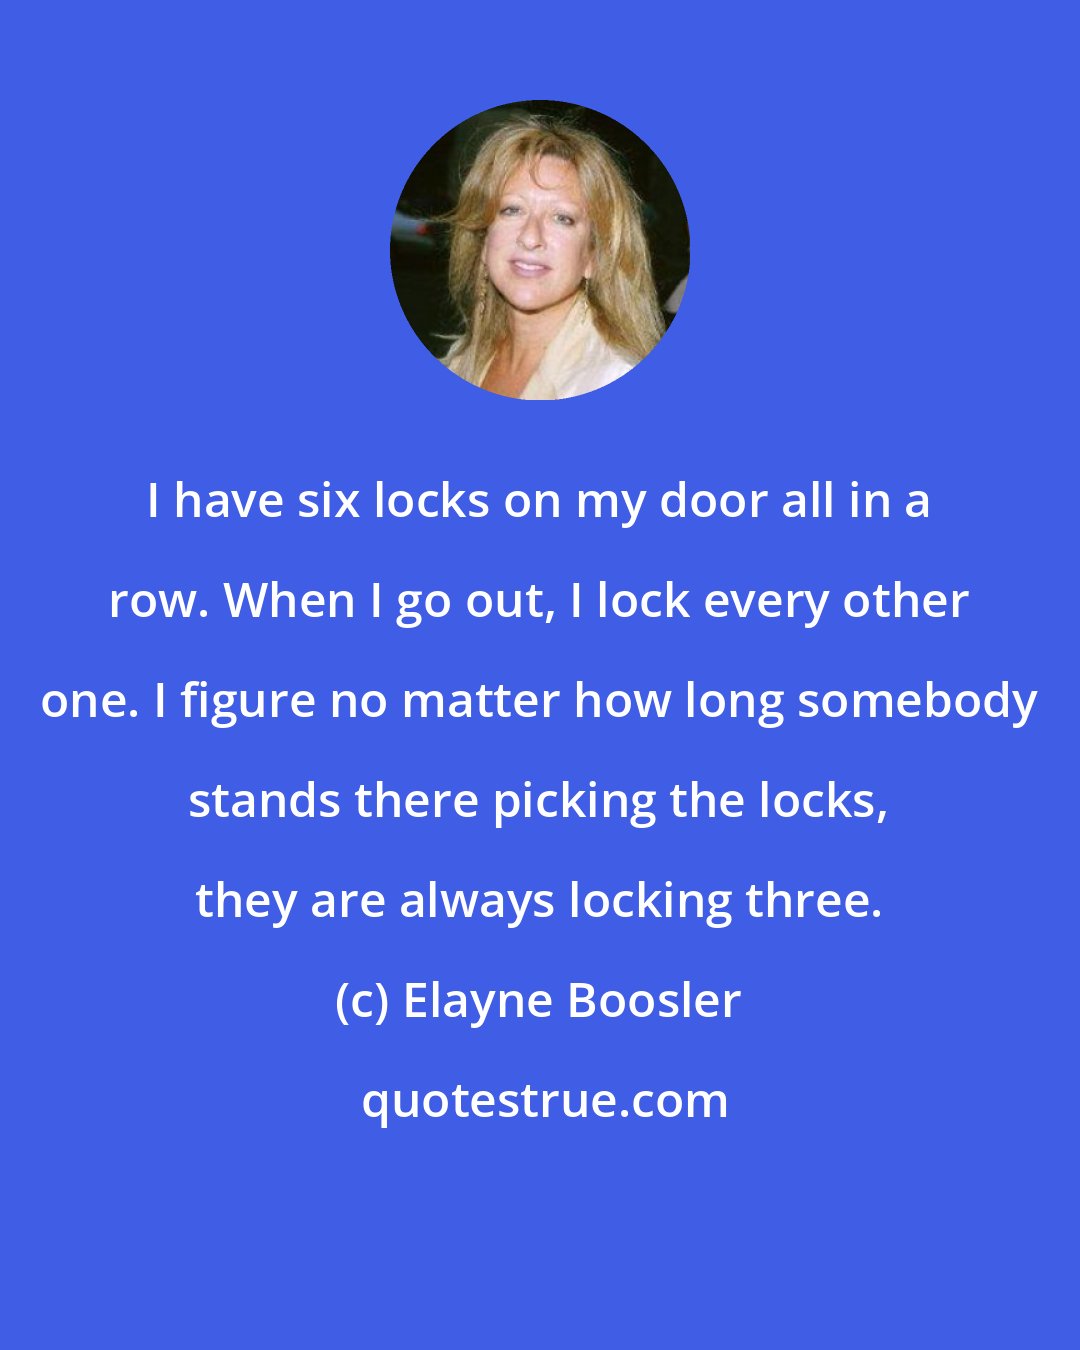 Elayne Boosler: I have six locks on my door all in a row. When I go out, I lock every other one. I figure no matter how long somebody stands there picking the locks, they are always locking three.